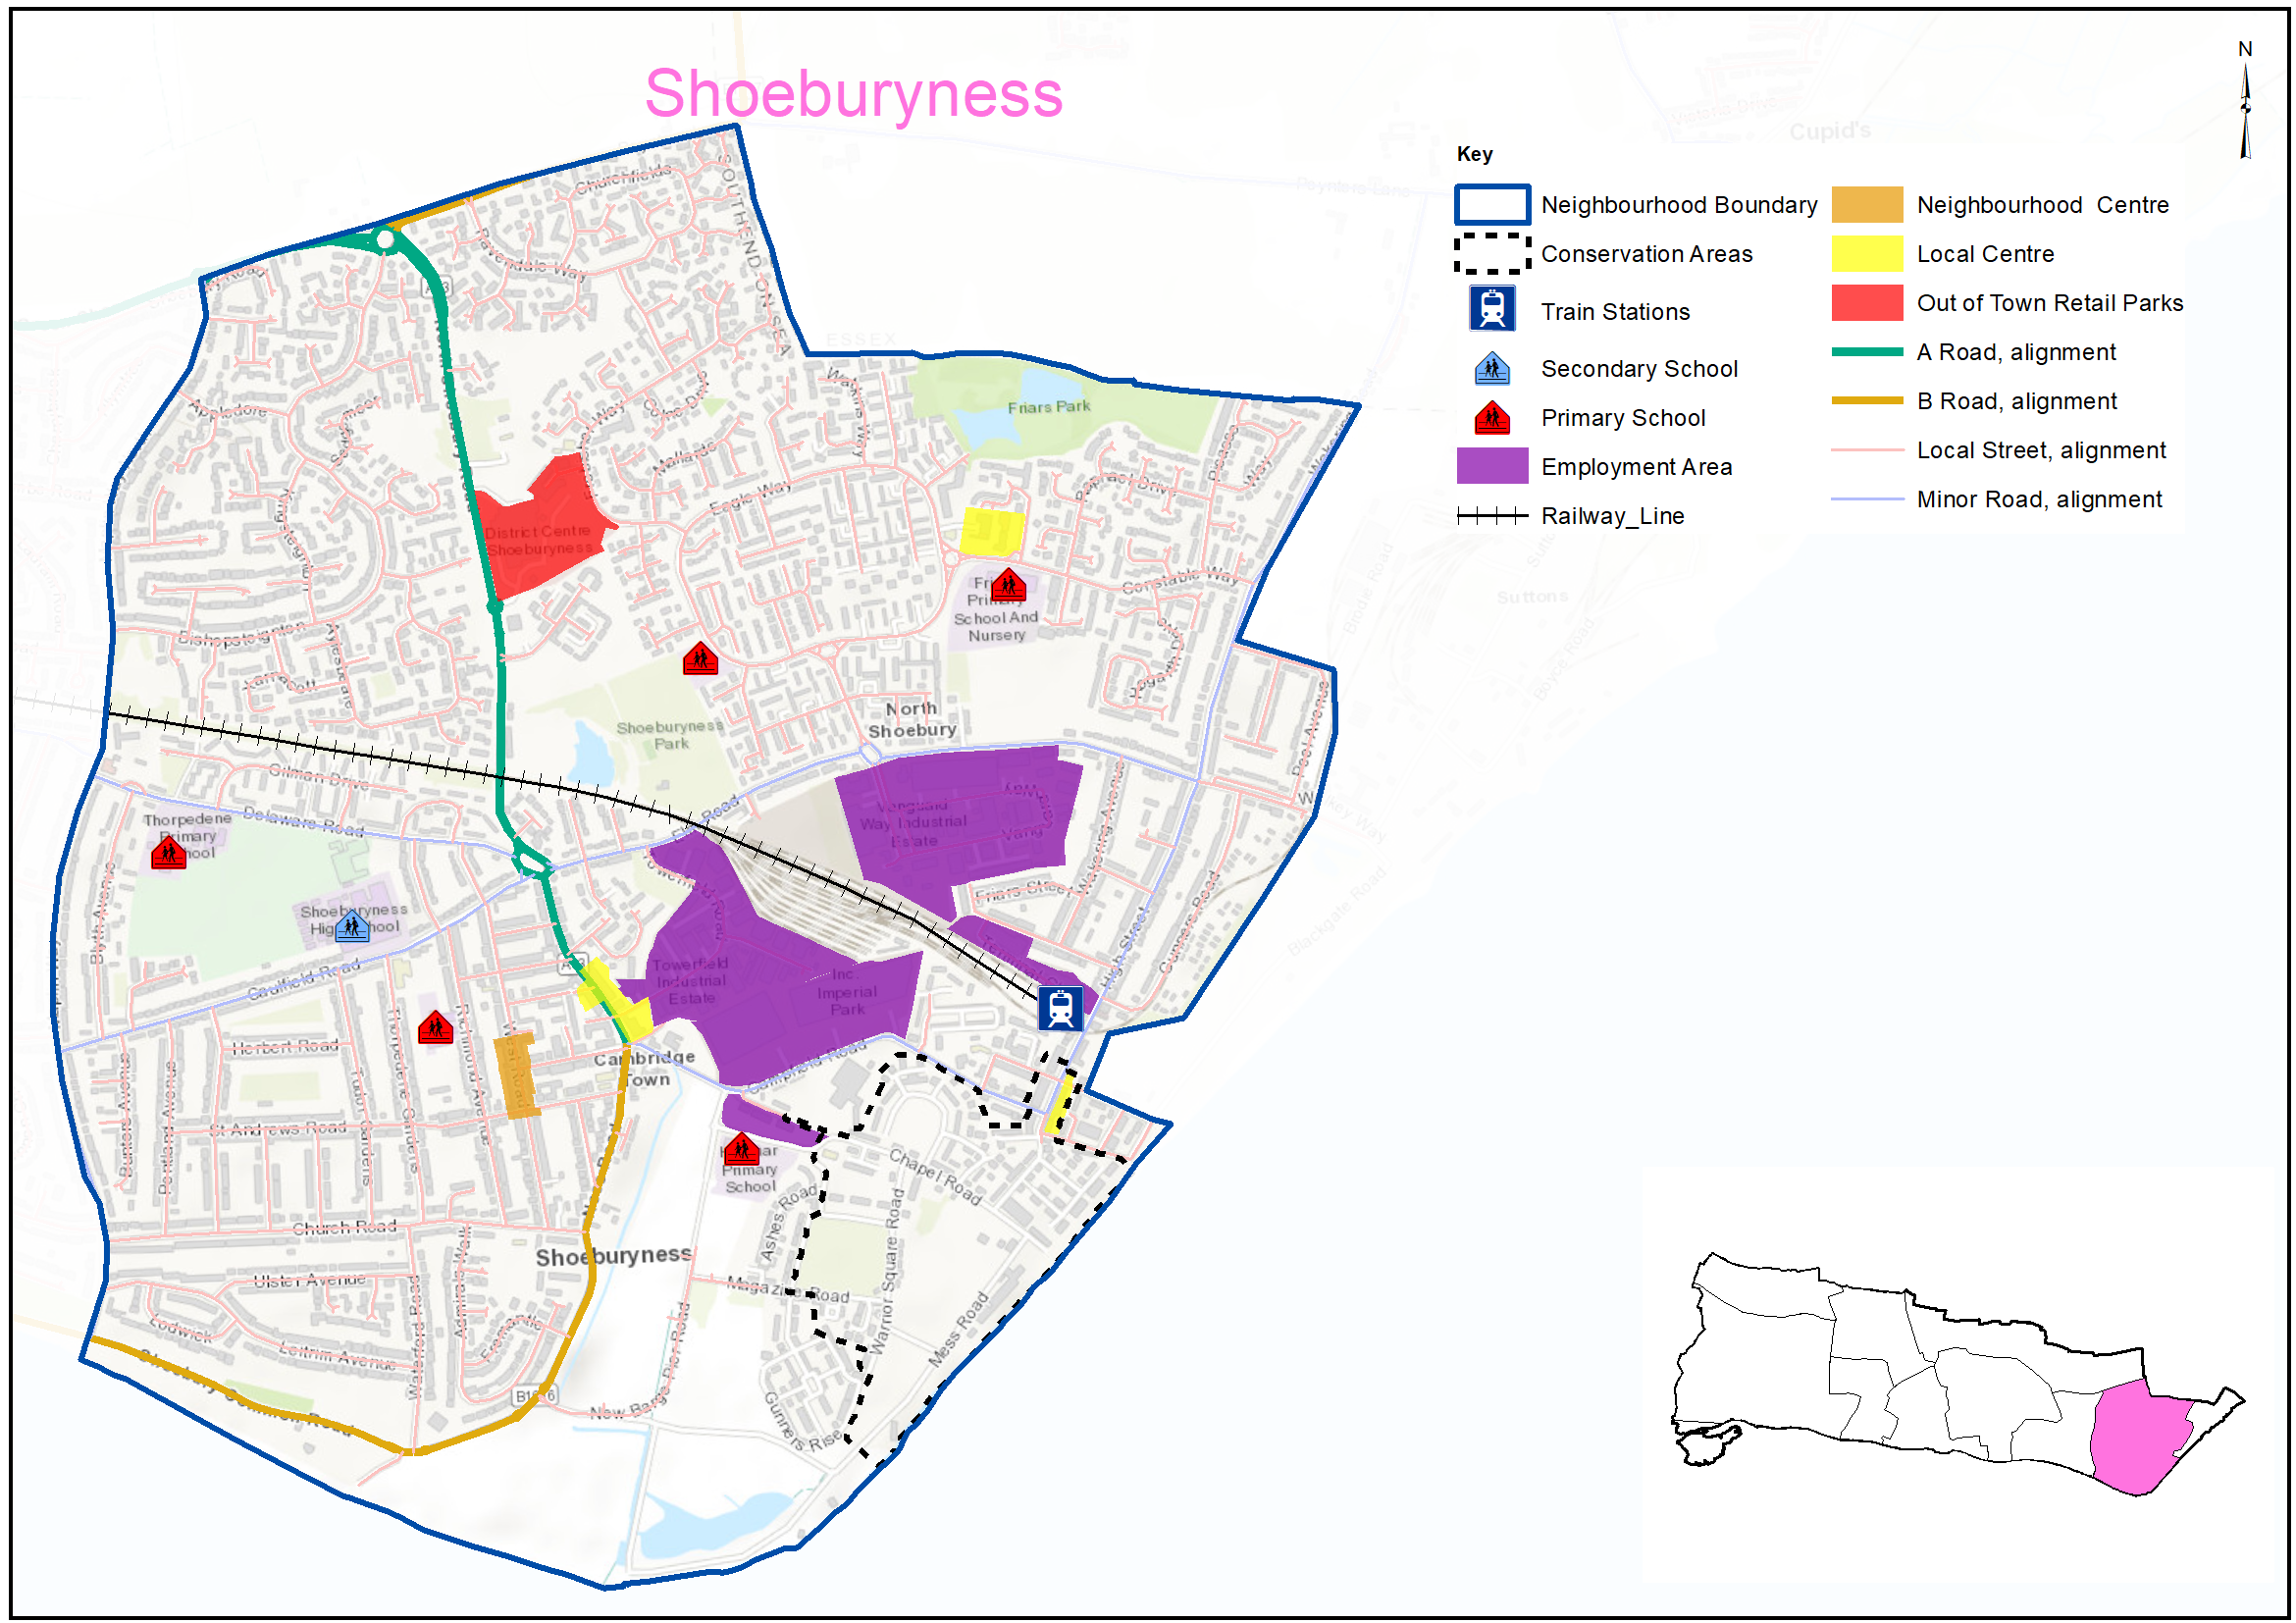 Shoeburyness profile showing key characteristics of the neighbourhood including previous housing growth; potential new homes; transport connections; education and healthcare provision; business and commercial areas; green space and car ownership.